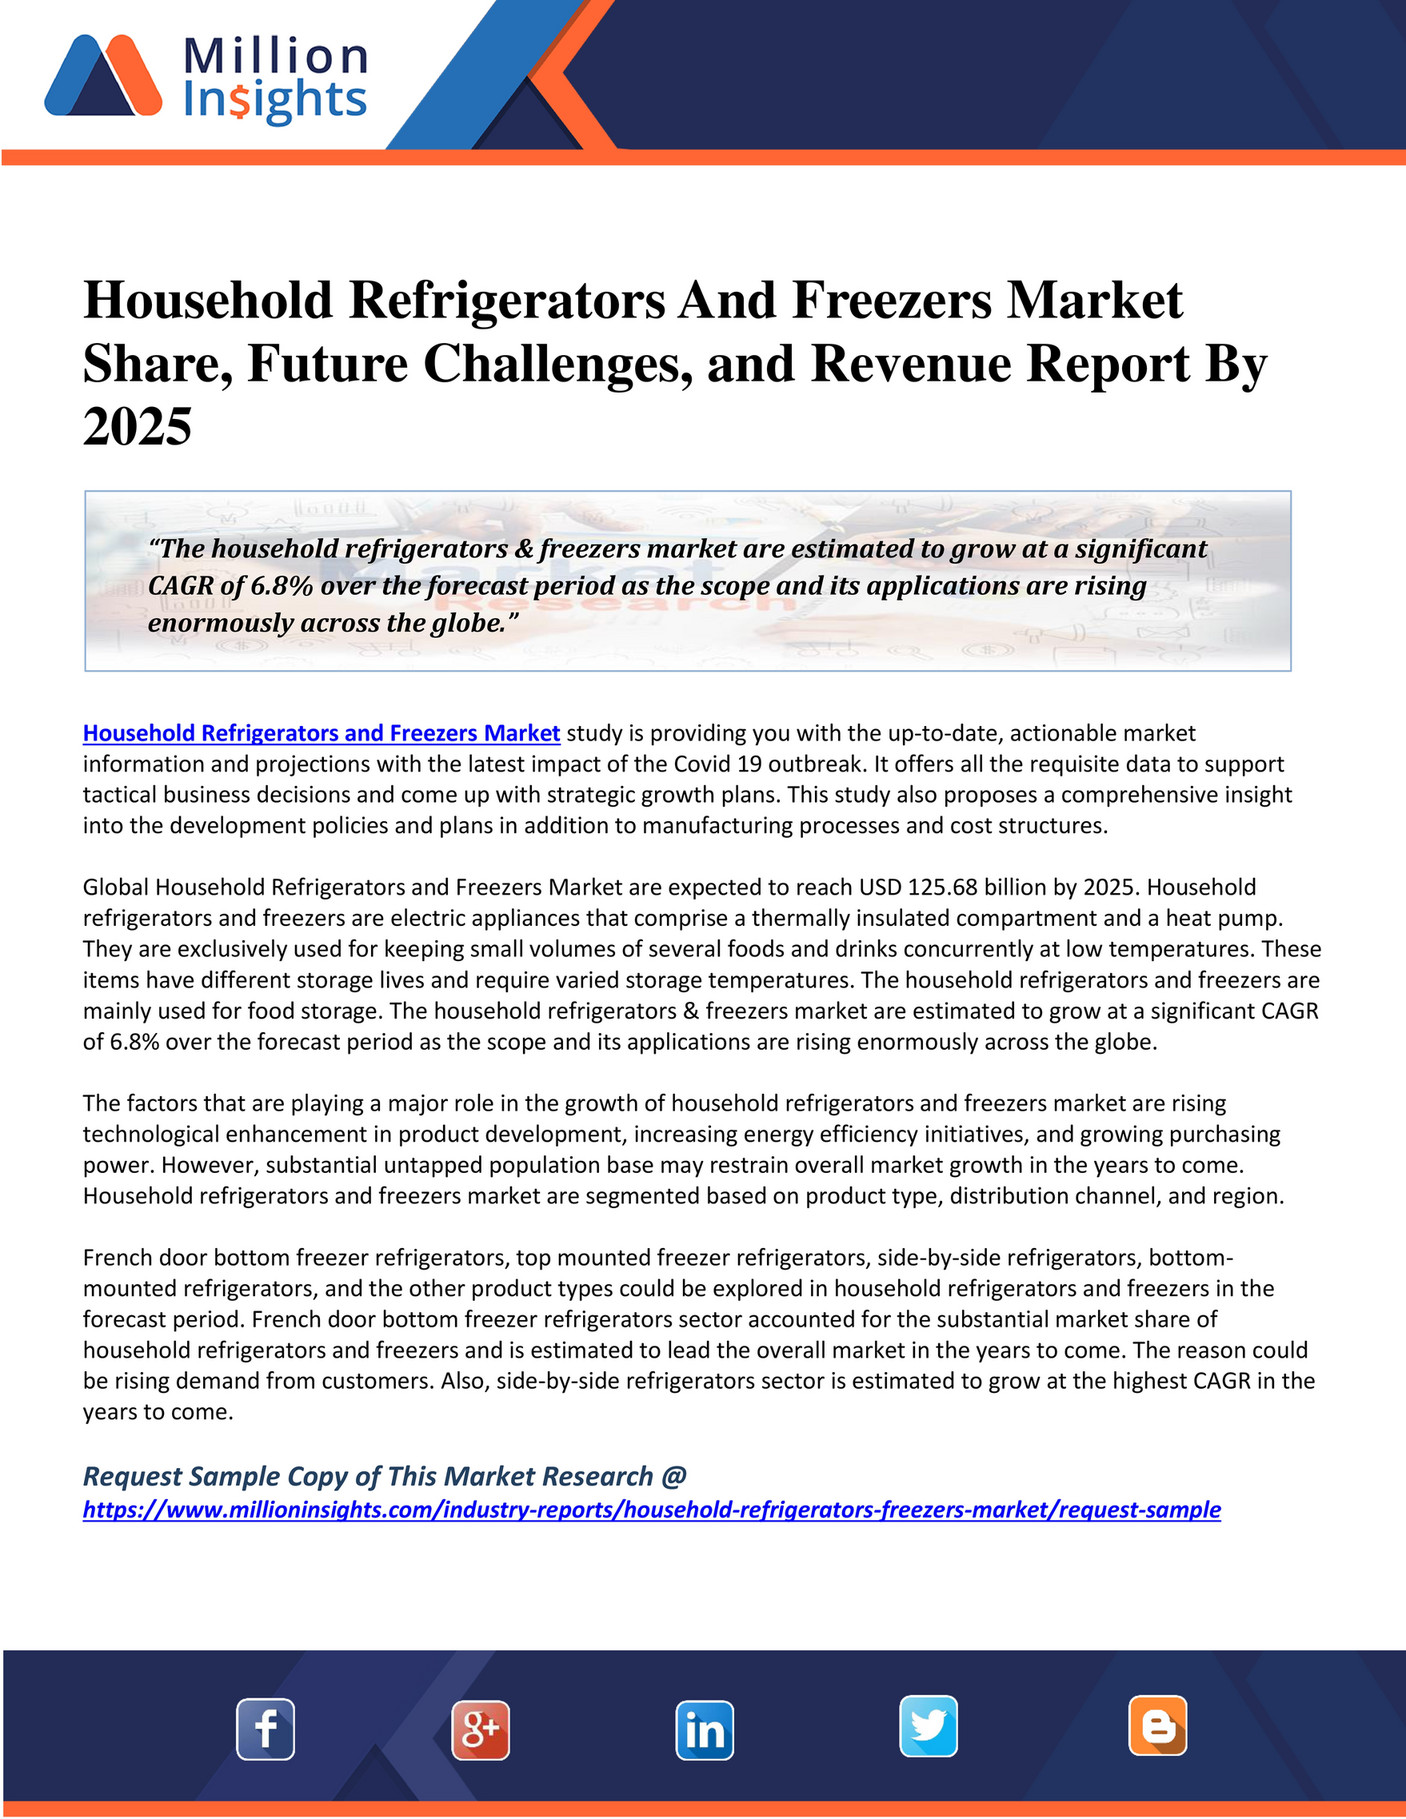 Million Insights Household Refrigerators And Freezers Market Share